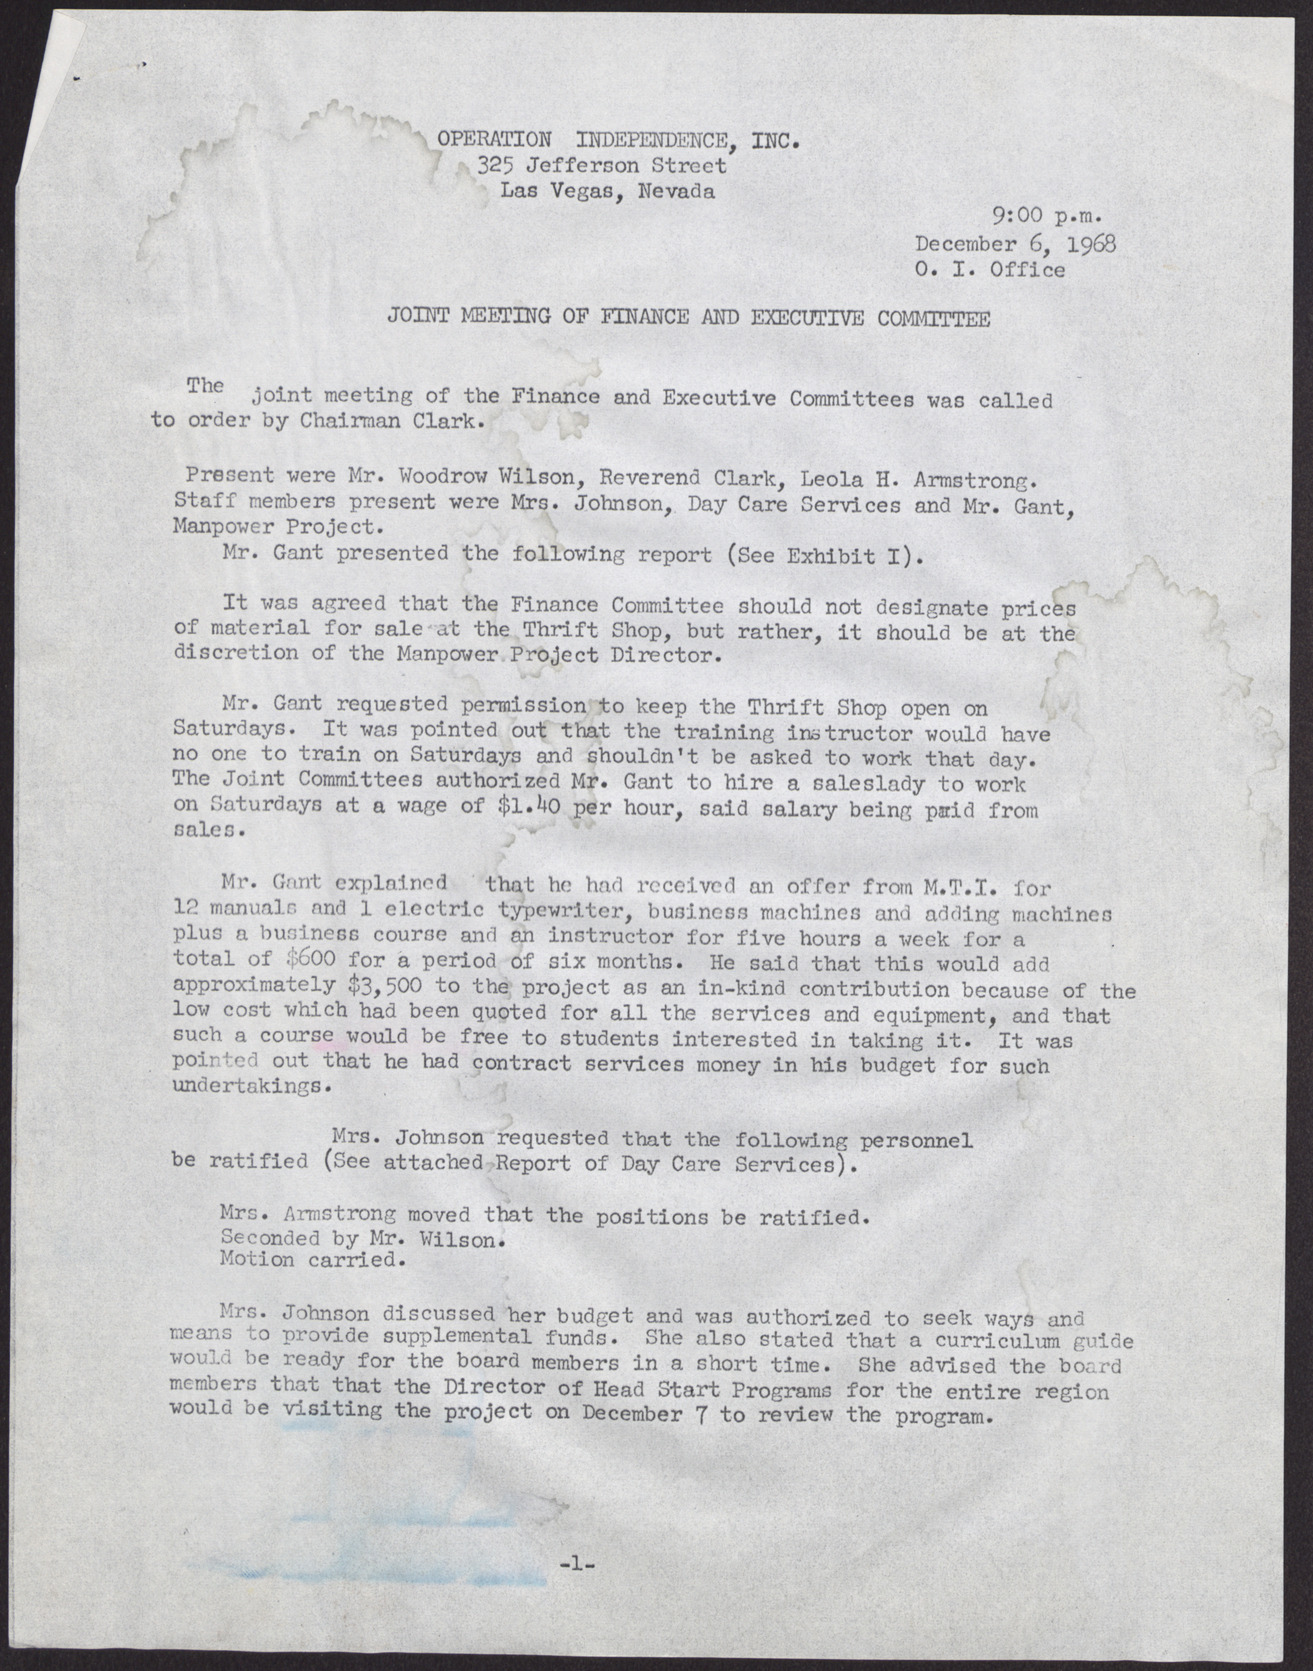 Minutes from Operation Independence Joint Meeting of Finance and Executive Committee (4 pages), December 6, 1968